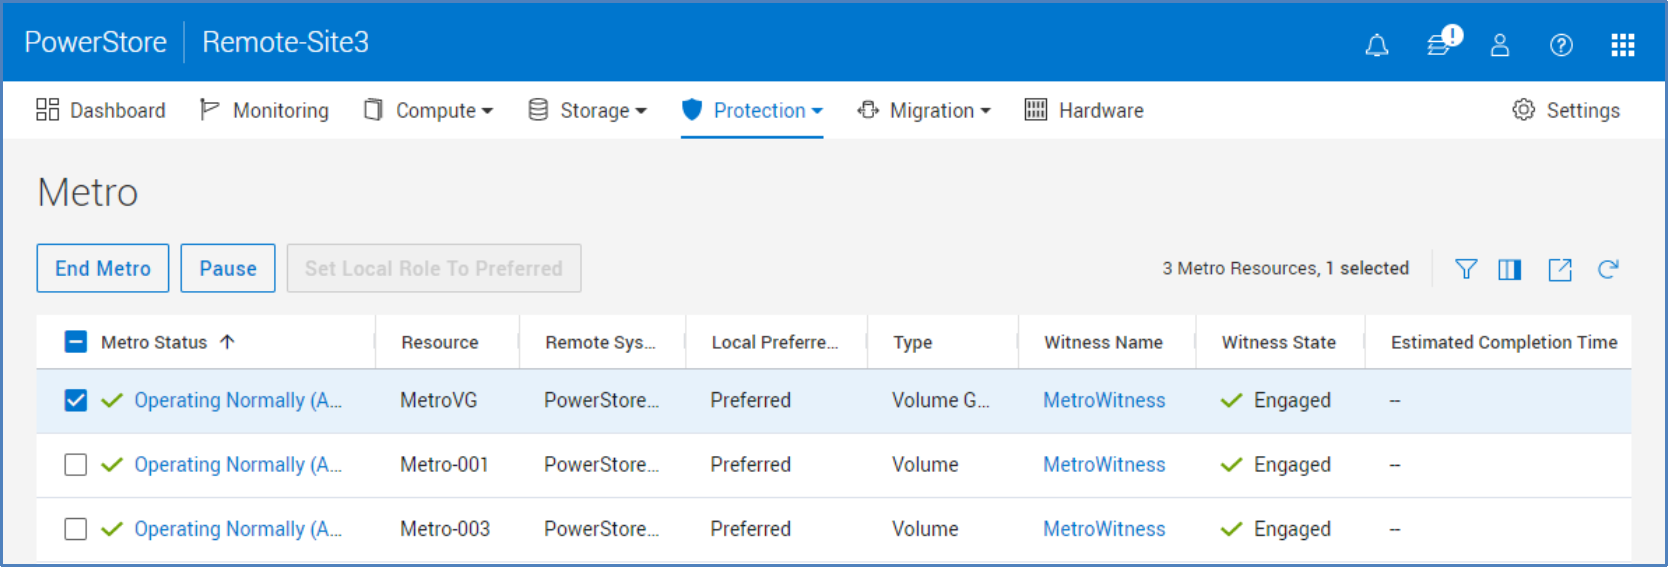 The Metro page within PowerStore Manager displays all metro sessions for the cluster. Here the status and resource information can be seen.